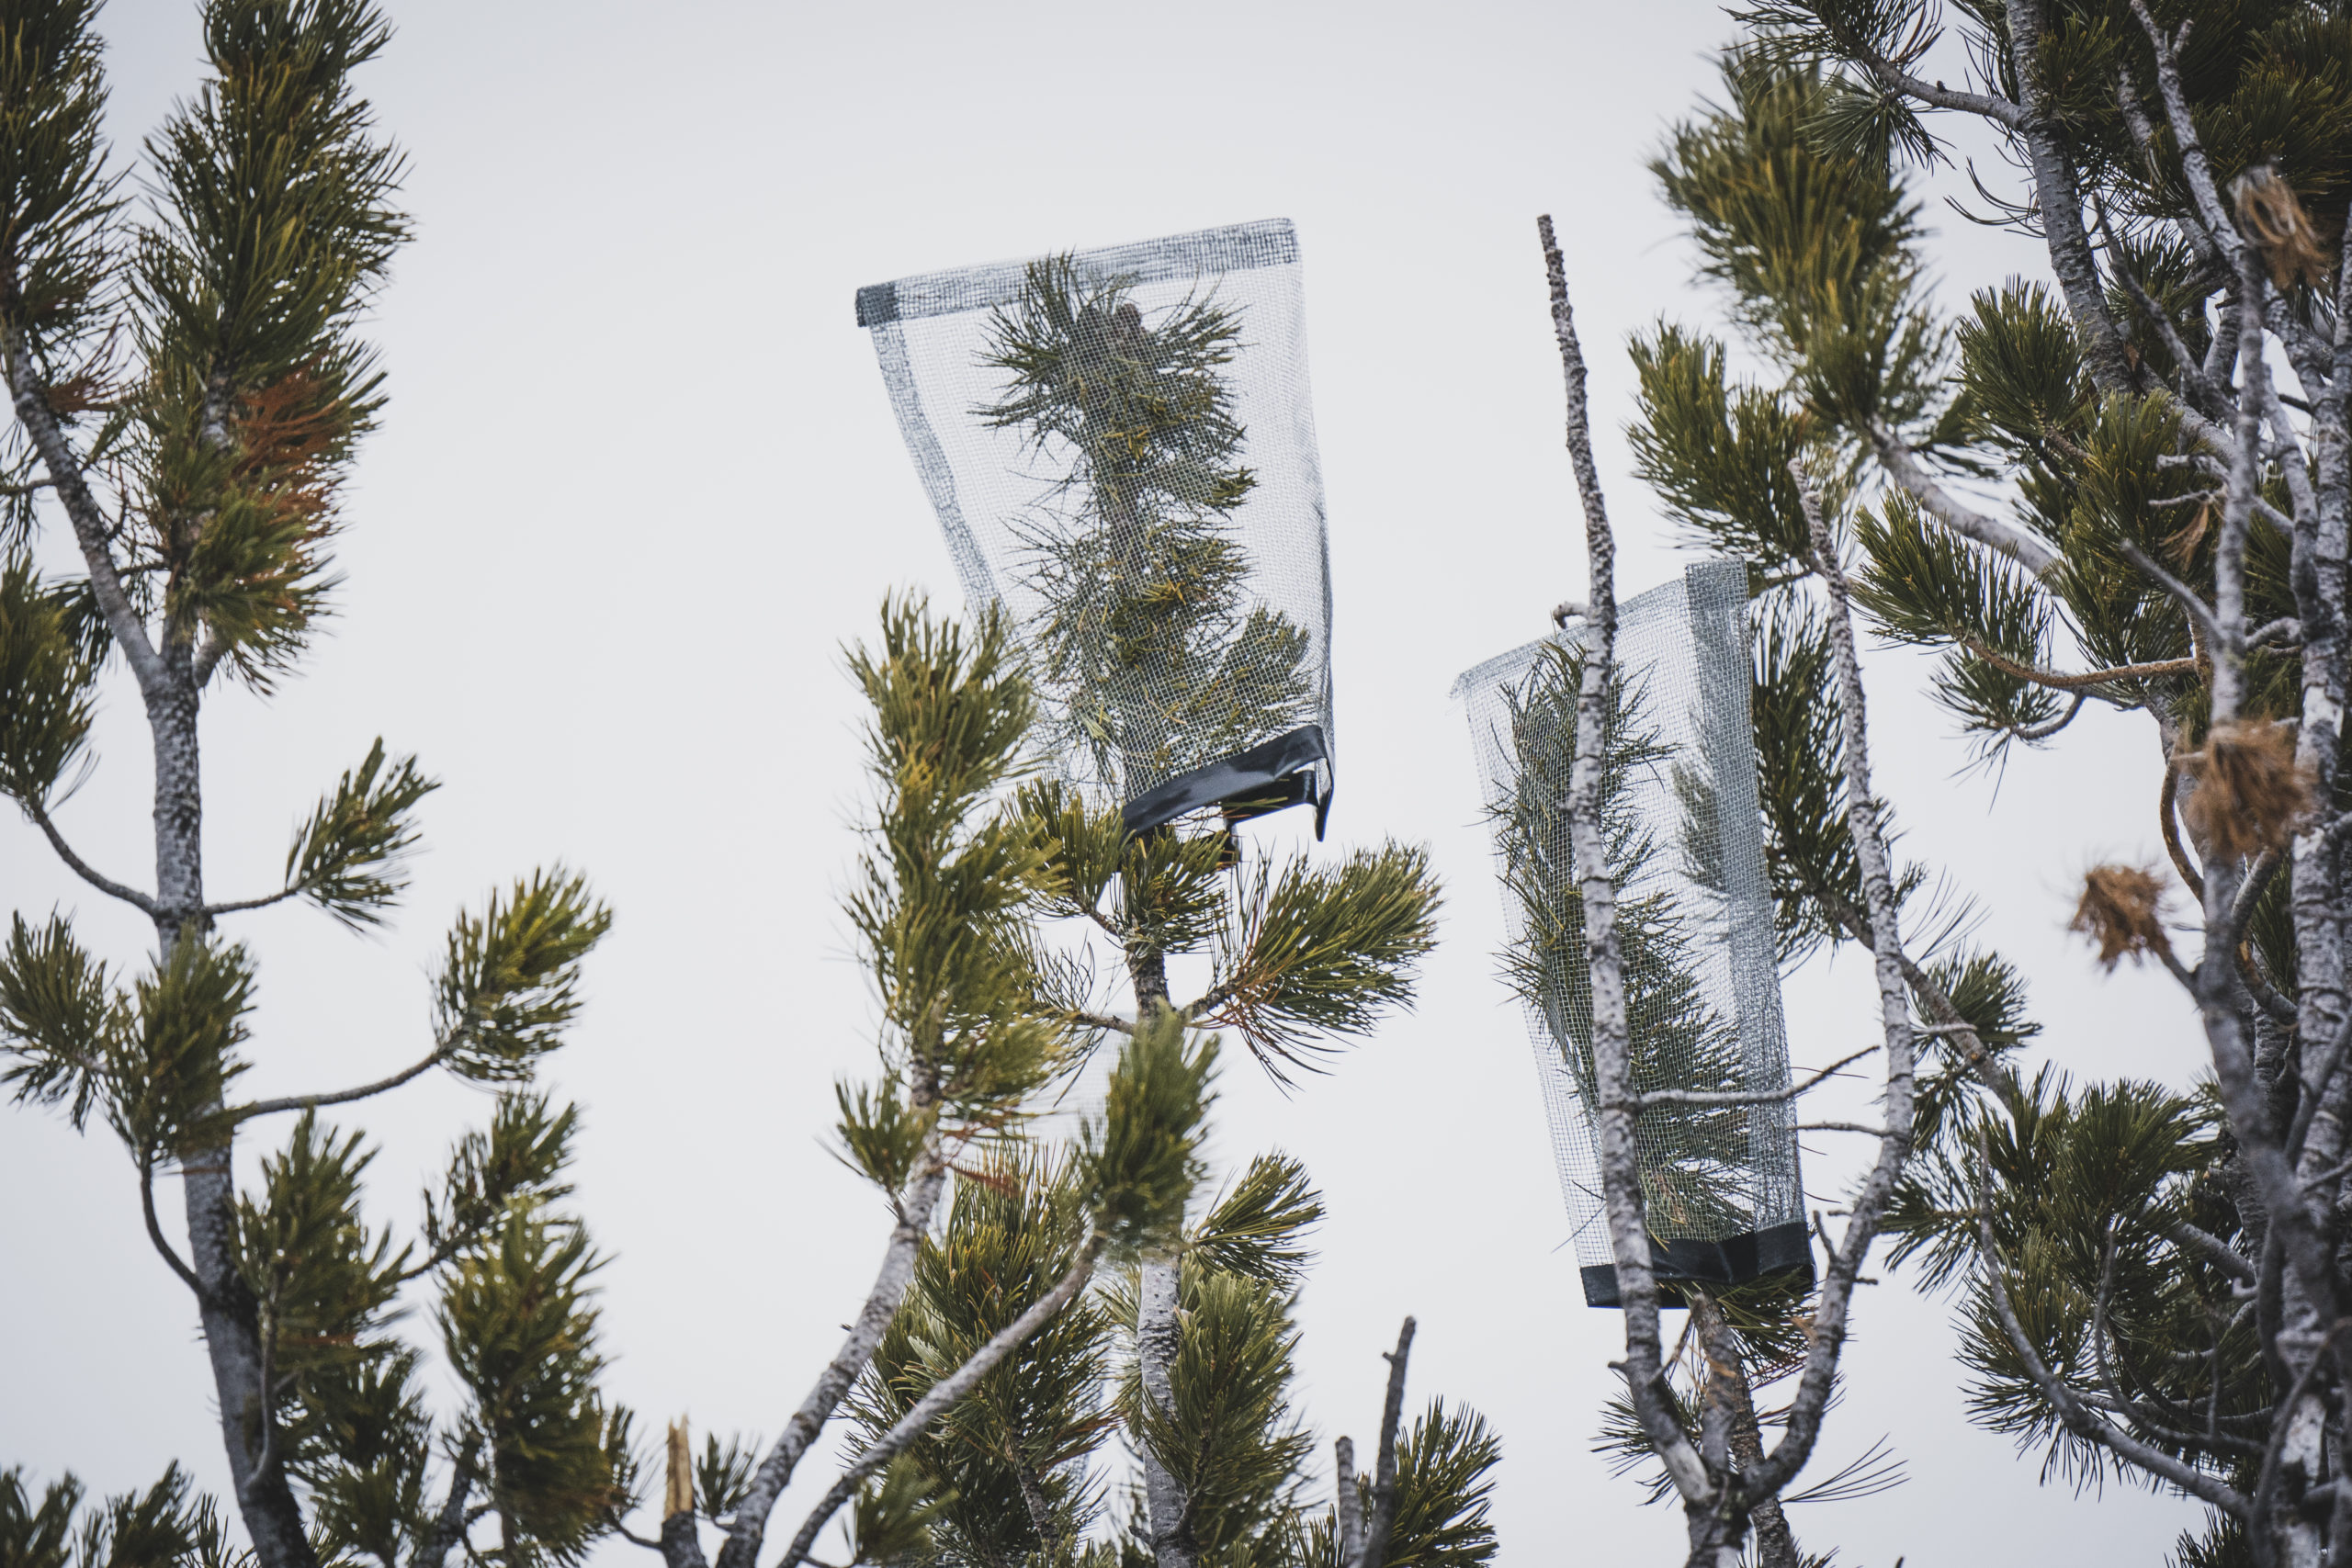 Skilled tree climbers place cages around the cones of whitebark pine trees in the summer to prevent animals from eating the cone seeds. The cages and cones are removed in the fall.